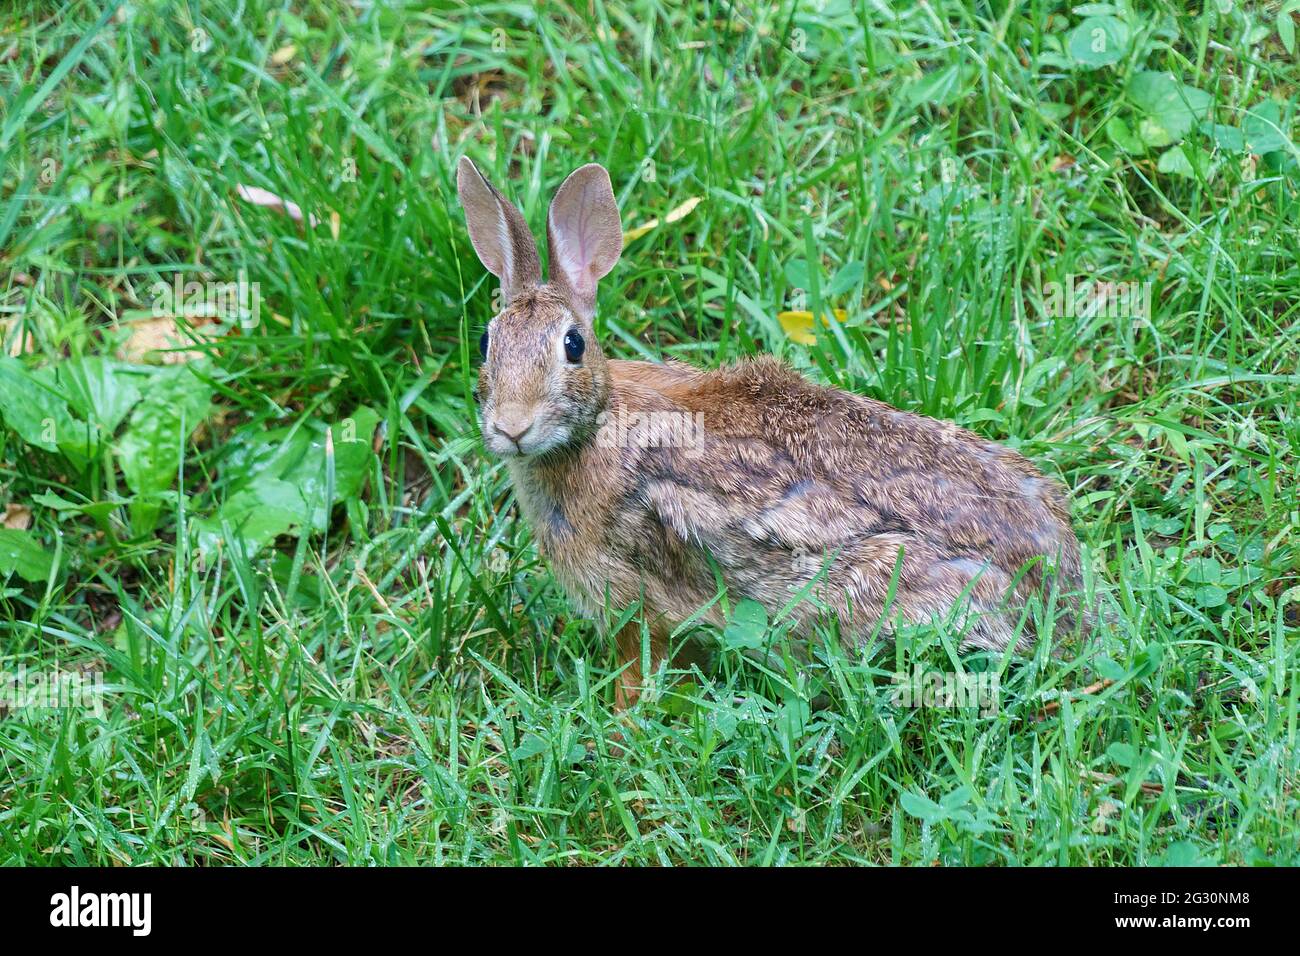 Brown rabbit in a meadow with short green grass. It is facing forward with it's ears pricked up. Stock Photo